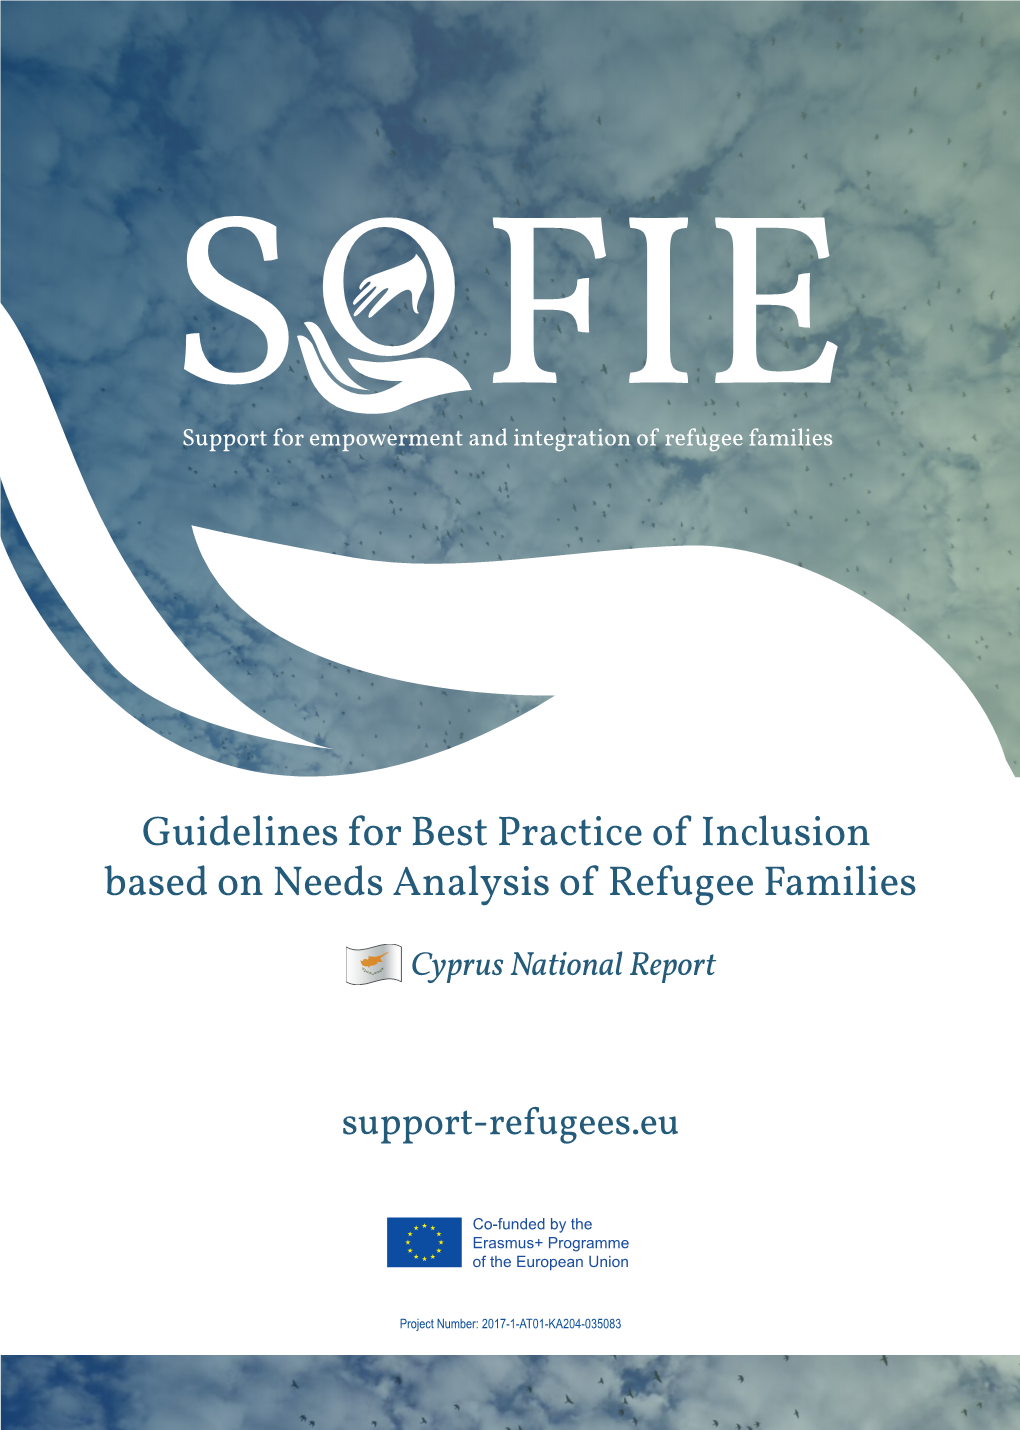 Guidelines for Best Practice of Inclusion Based on Needs Analysis of Refugee Families